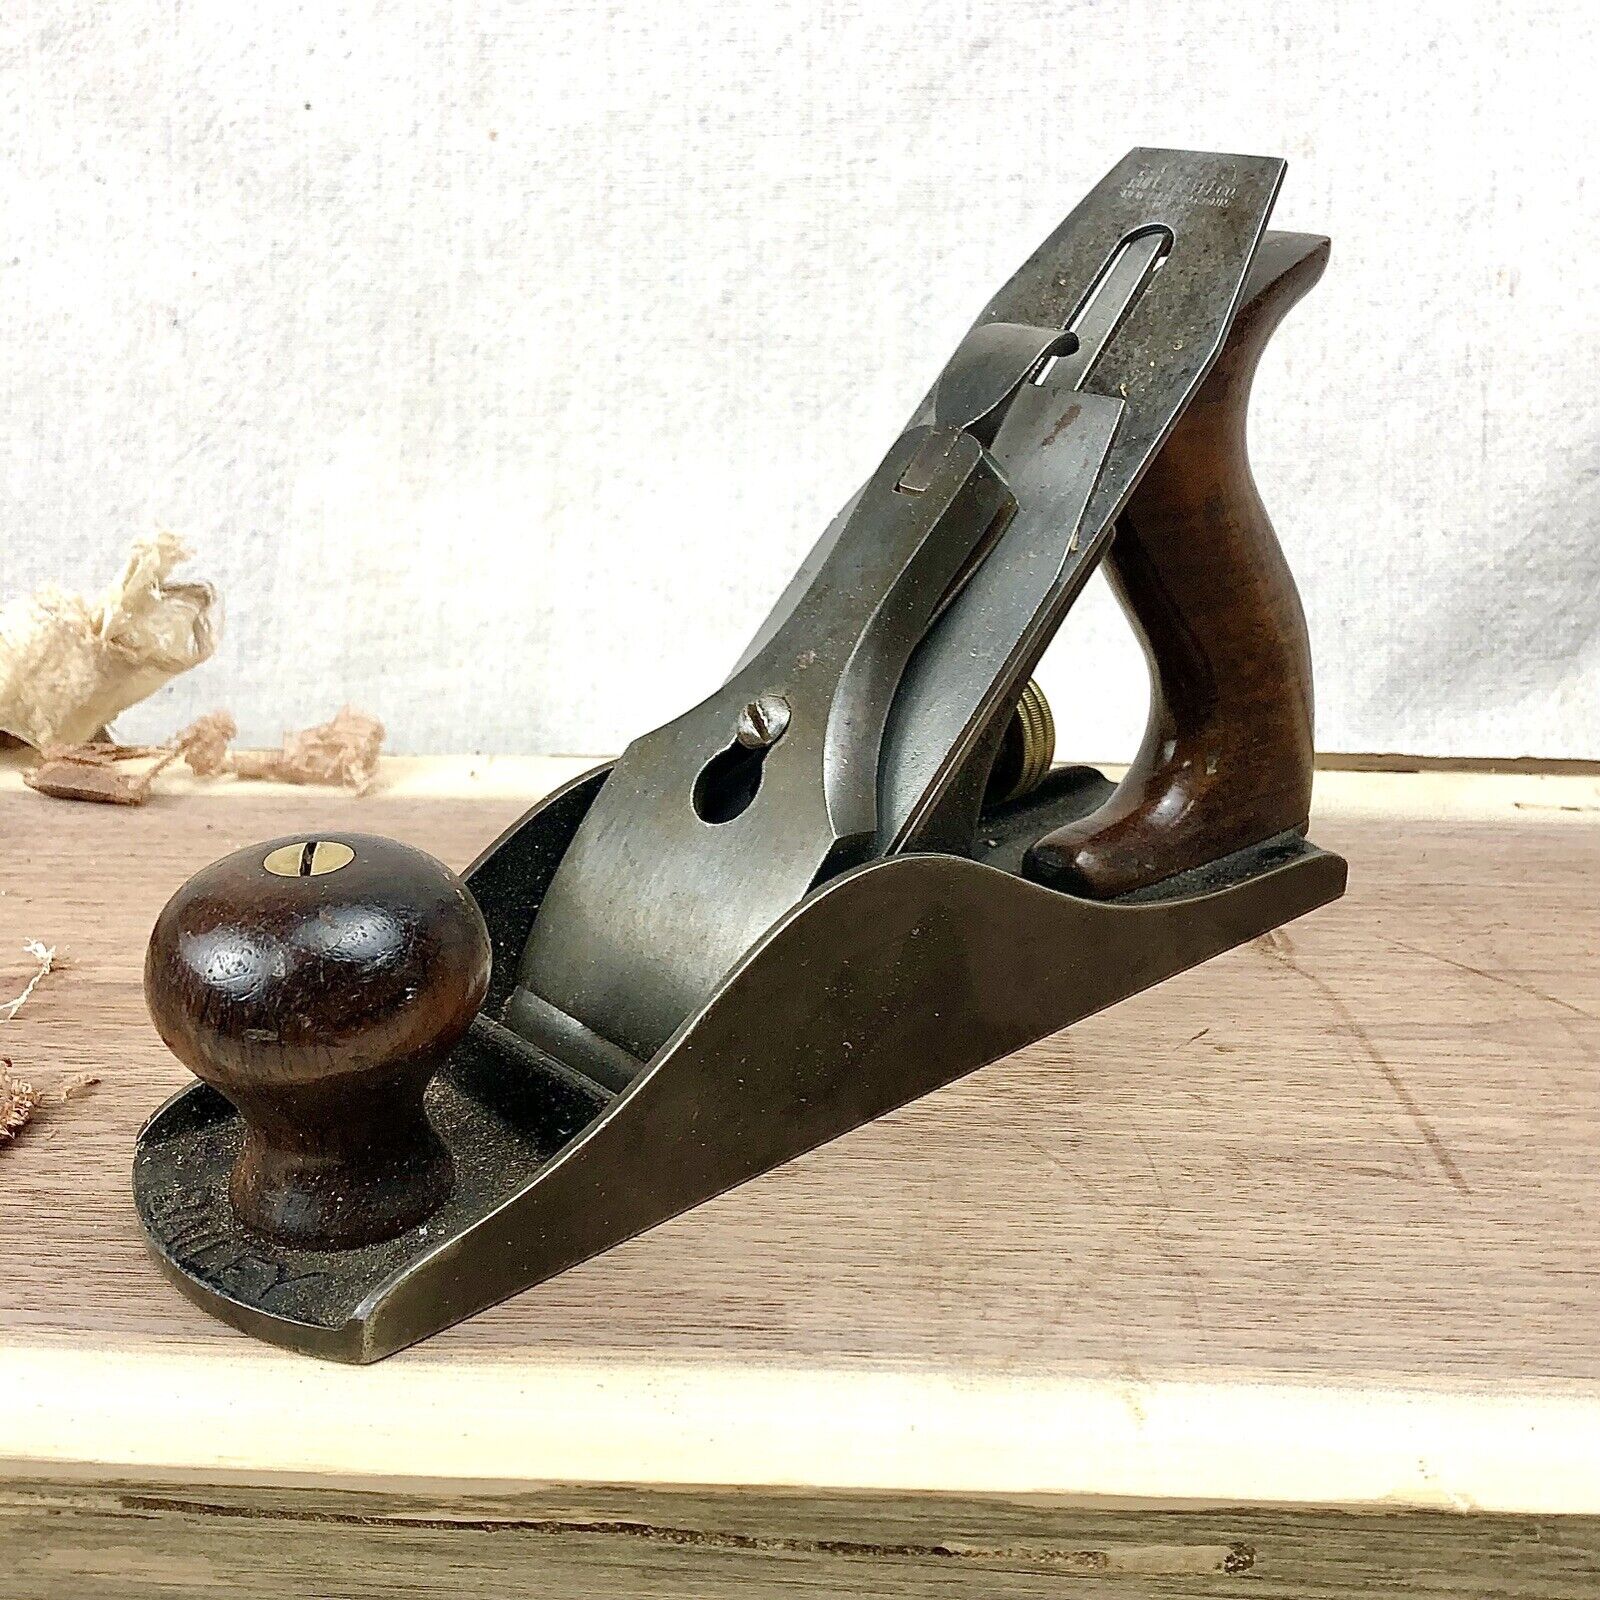 Vintage No. 4 Stanley Bailey Plane, Type 11 C with ‘T’ Trademark Iron.